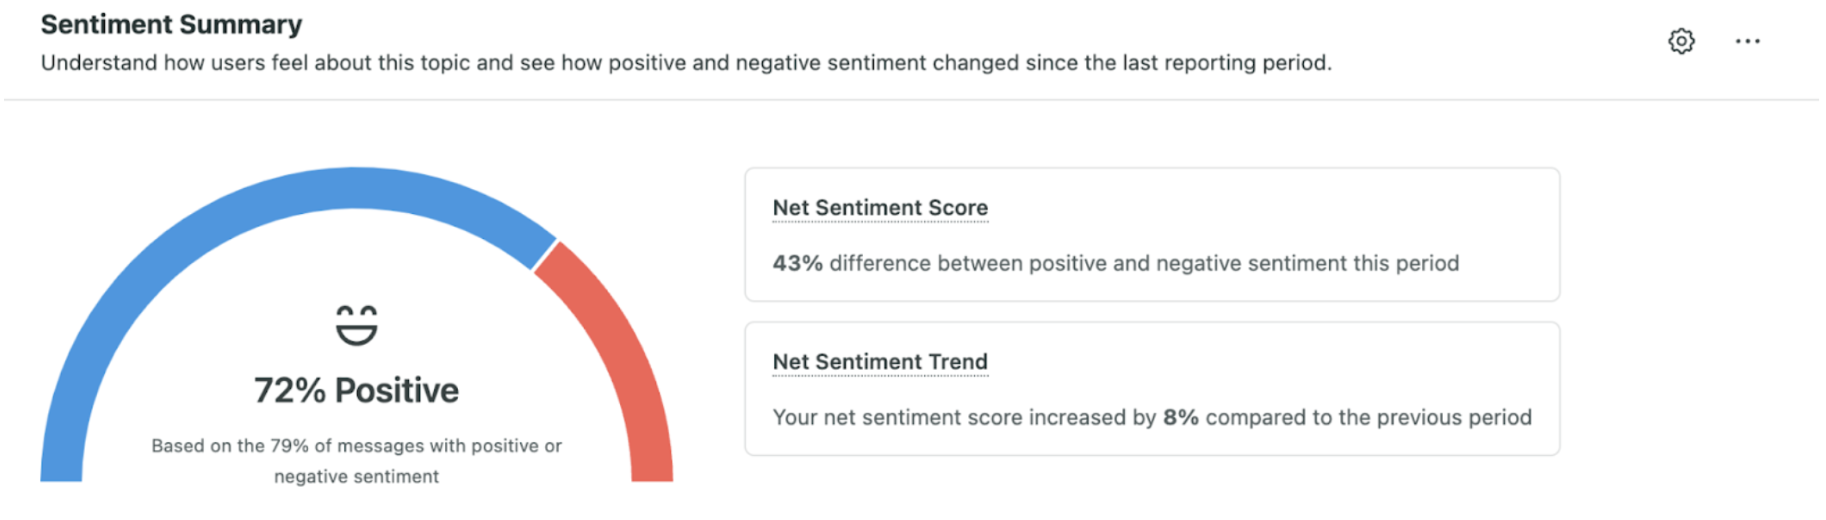 Screenshot of Sentiment Summary from Sprout Social. The image shows a 72% positive sentiment along with data like net sentiment score and net sentiment trend.